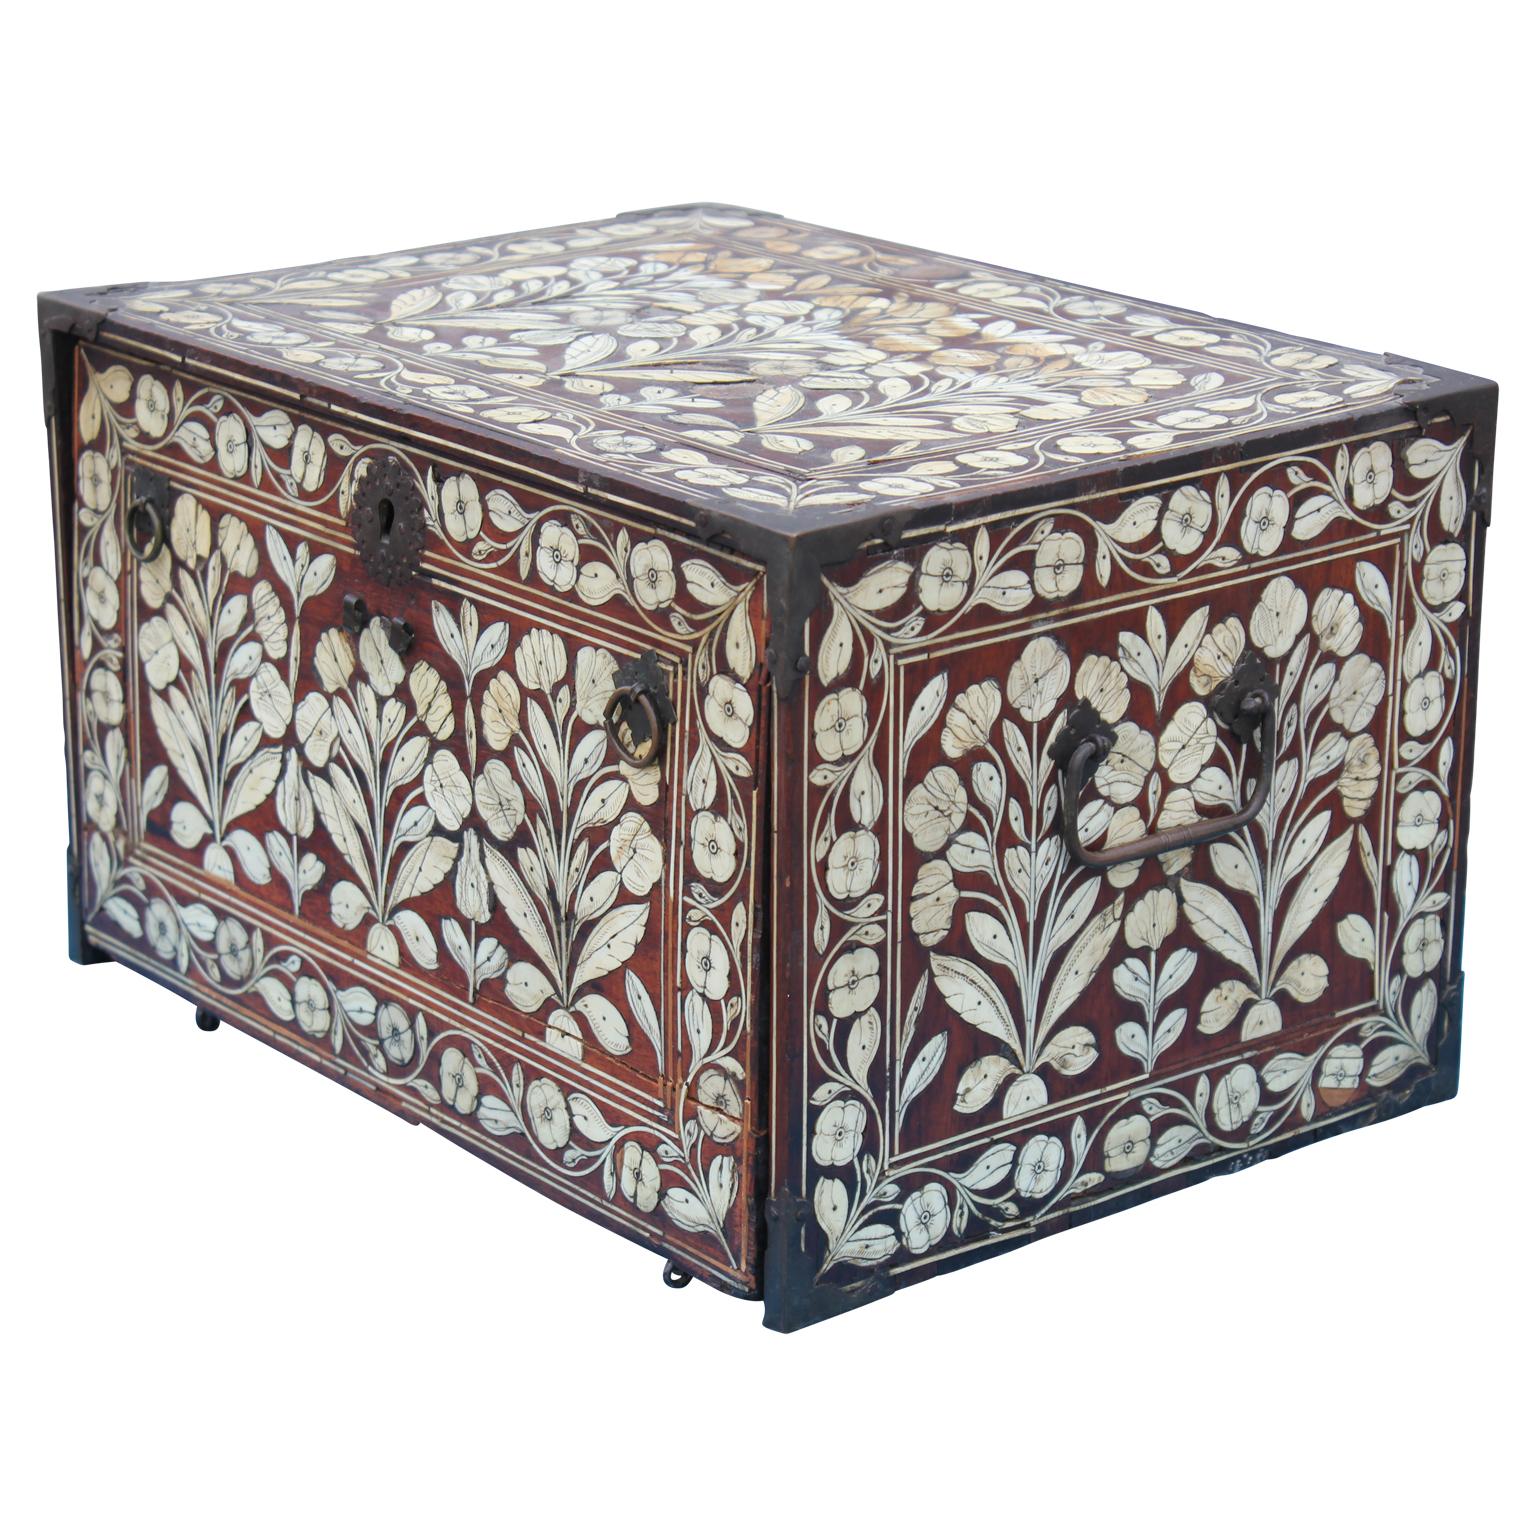 Anglo-Indian Beautiful Indo-Portuguese Mughal India Bone-Inlaid Fall Front Cabinet Box